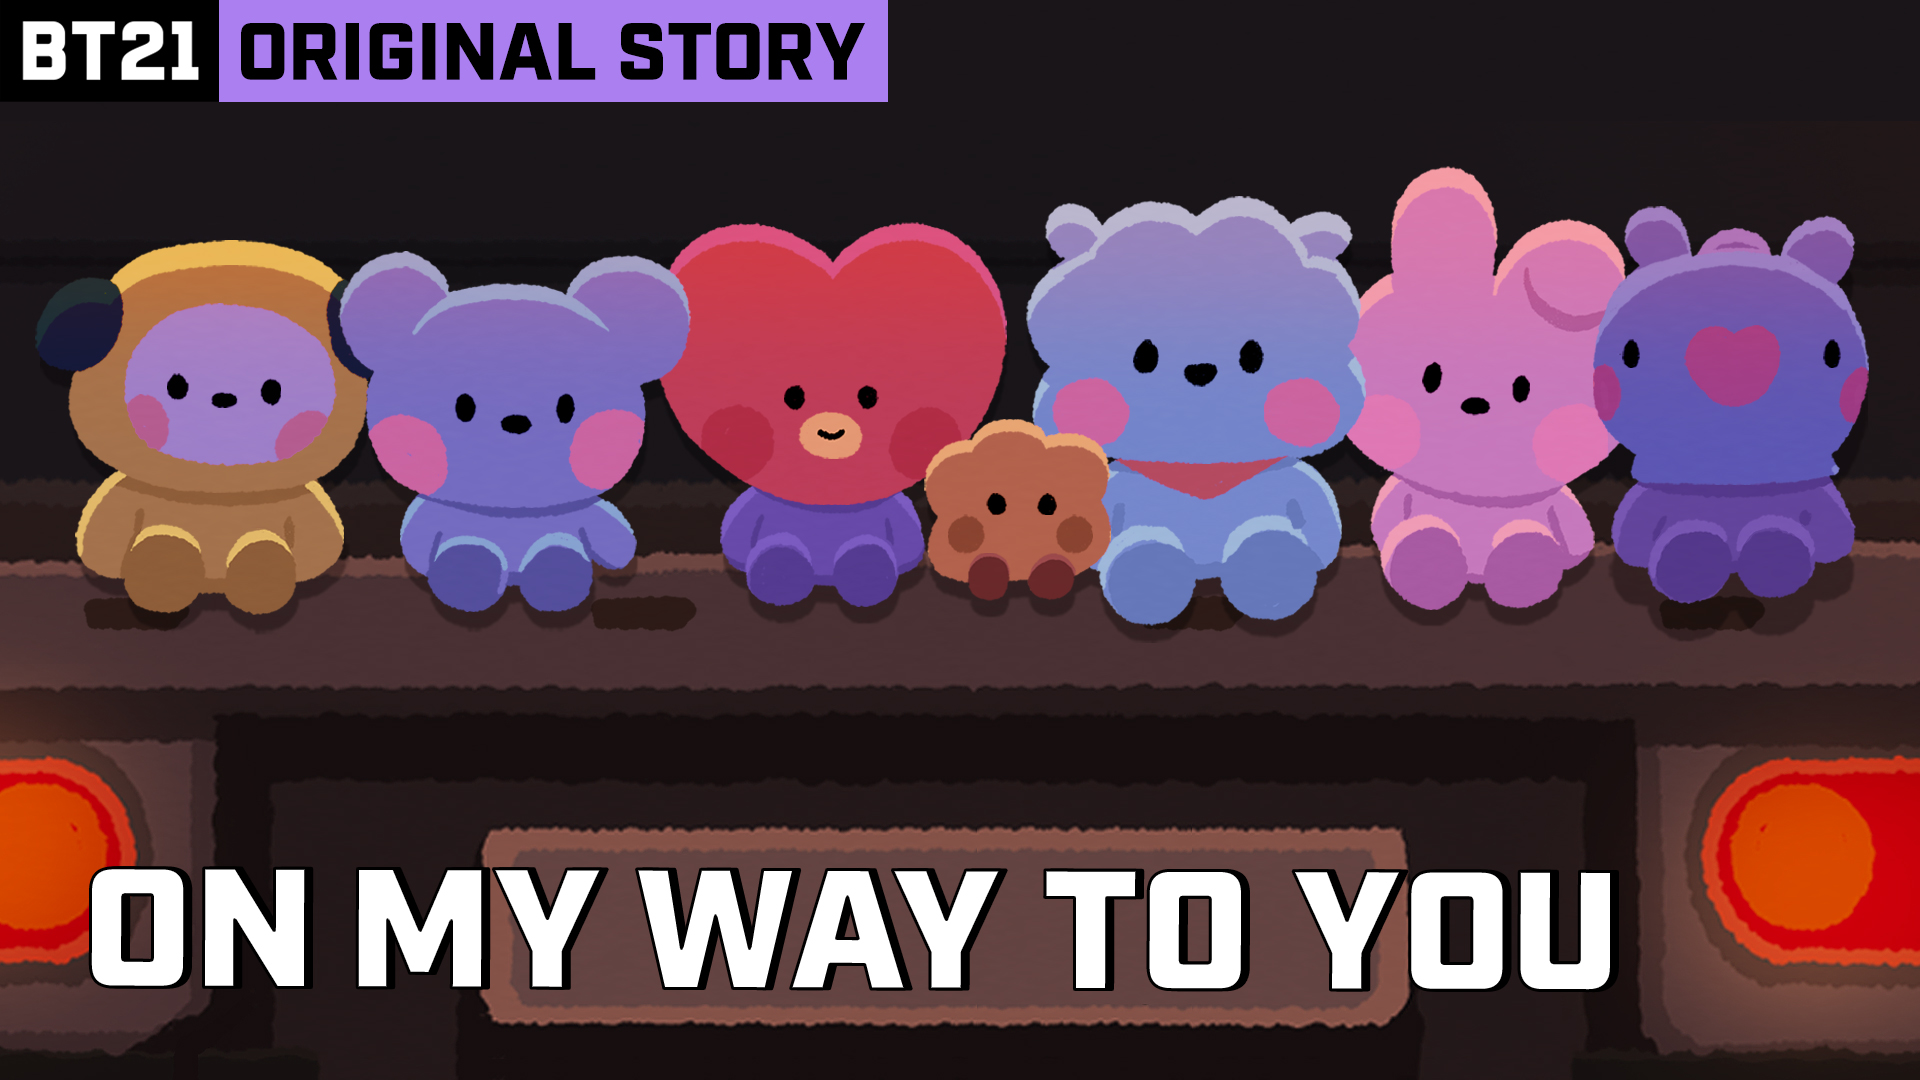 BT21 ORIGINAL STORY EP.12 - ON MY WAY TO YOU